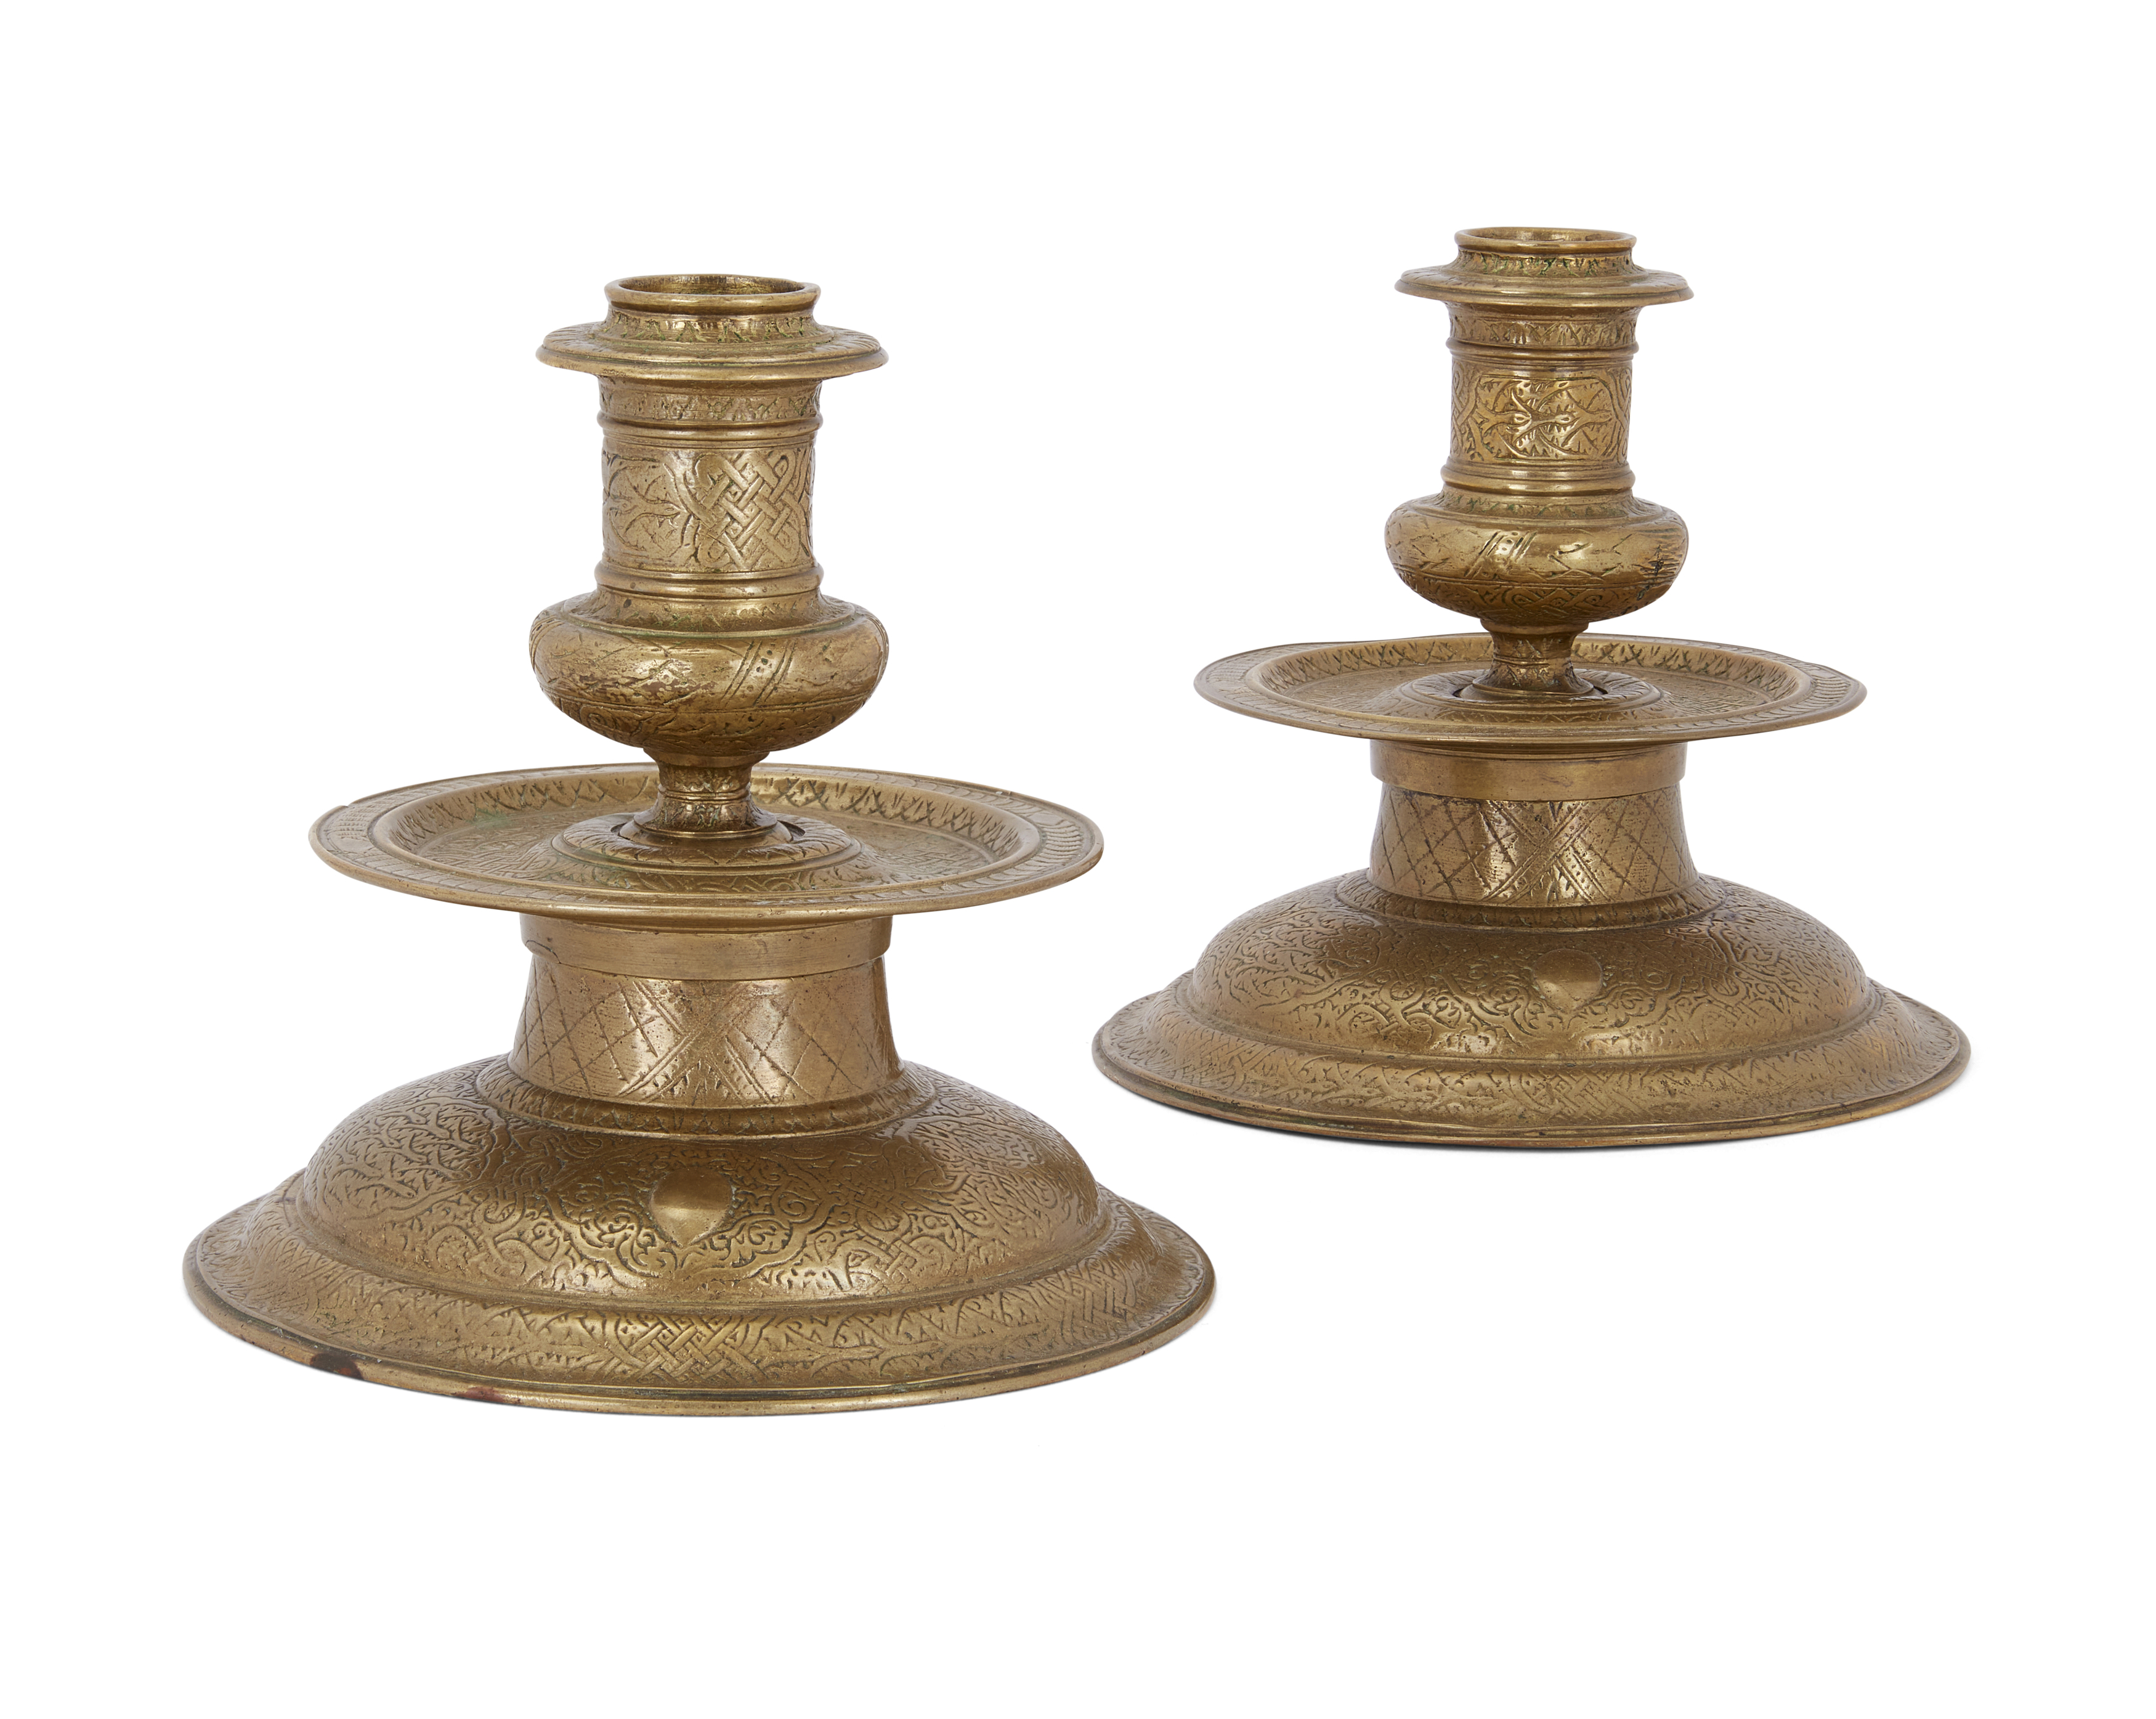 Two Veneto-Saracenic candlesticks, late 19th-early 20th century, Of typical form, the flanged t...